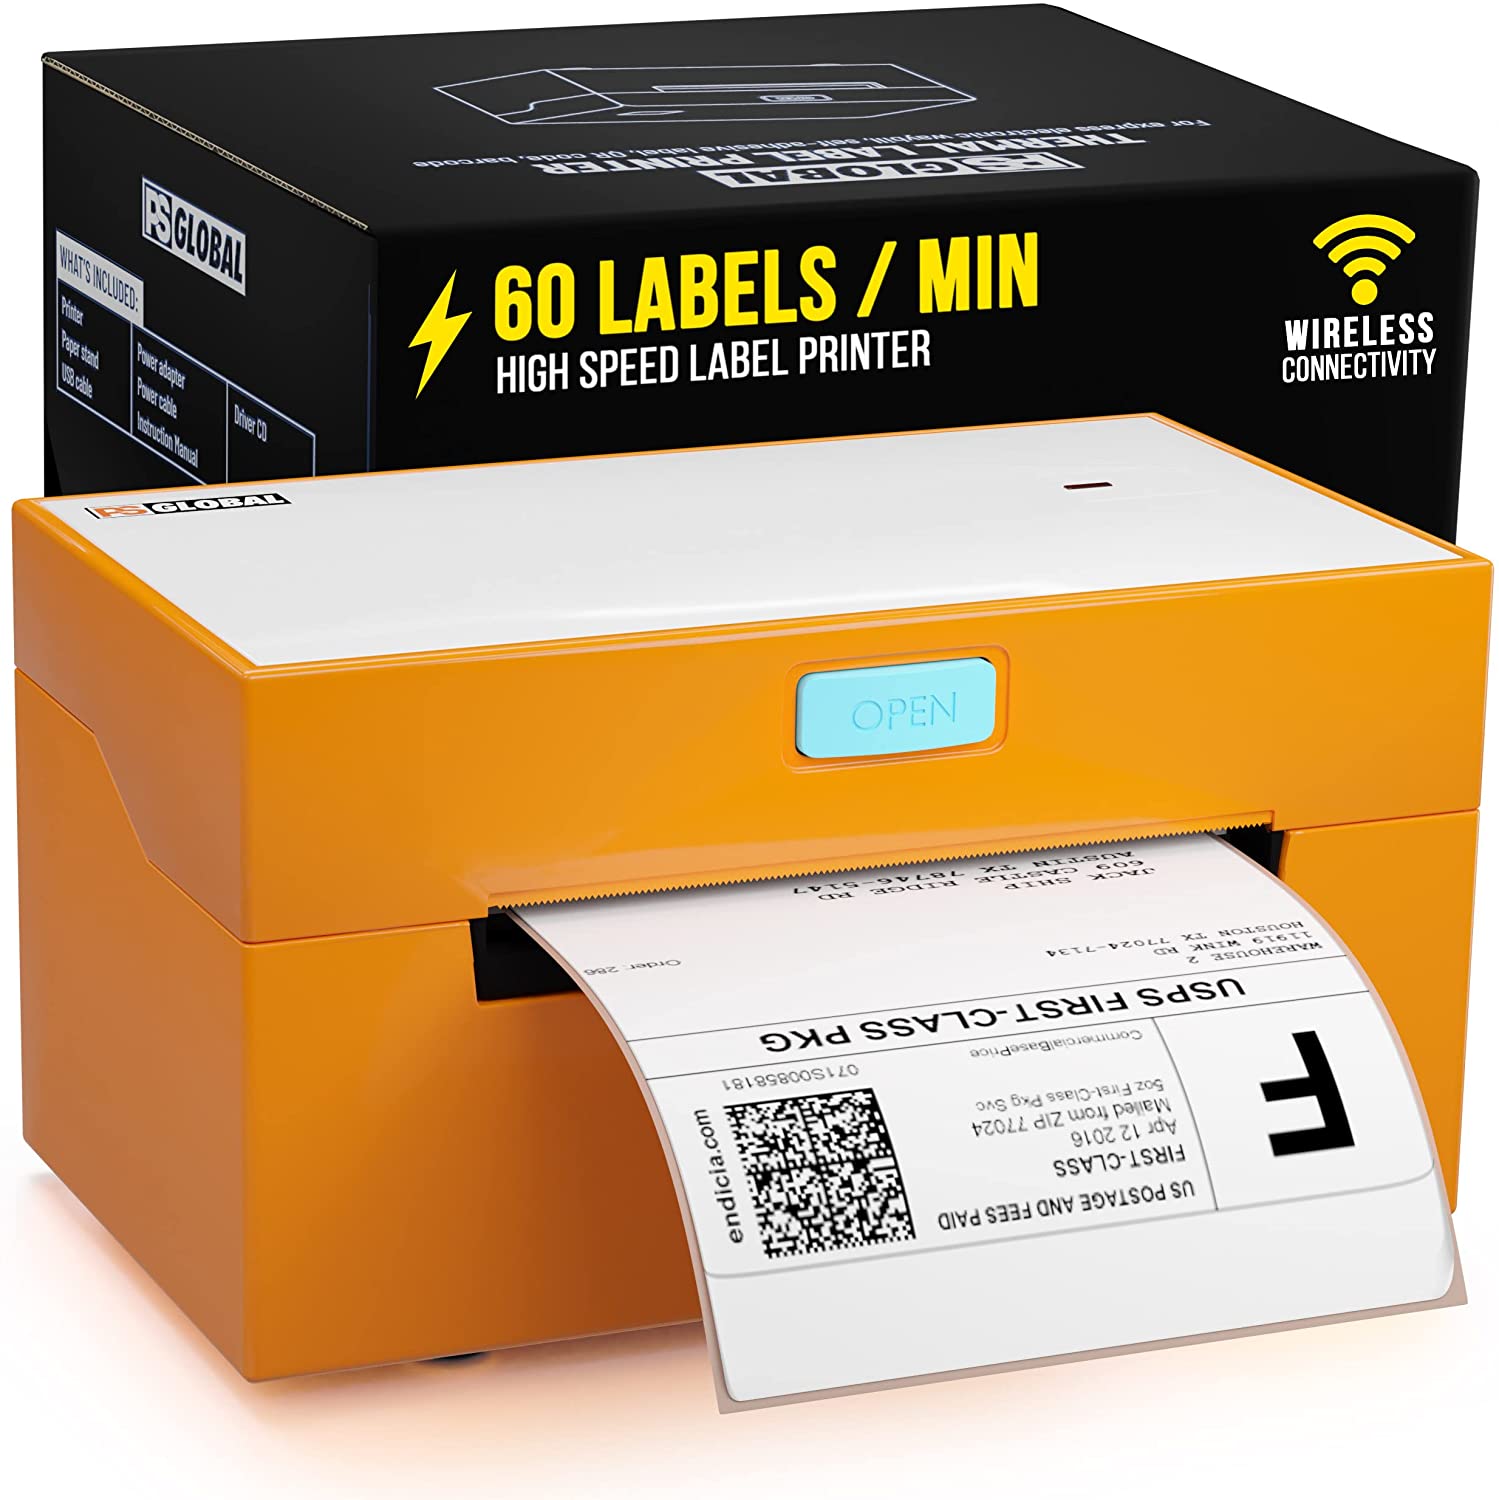 PSGLOBAL’s Thermal Label Printer Officially Launches On Amazon